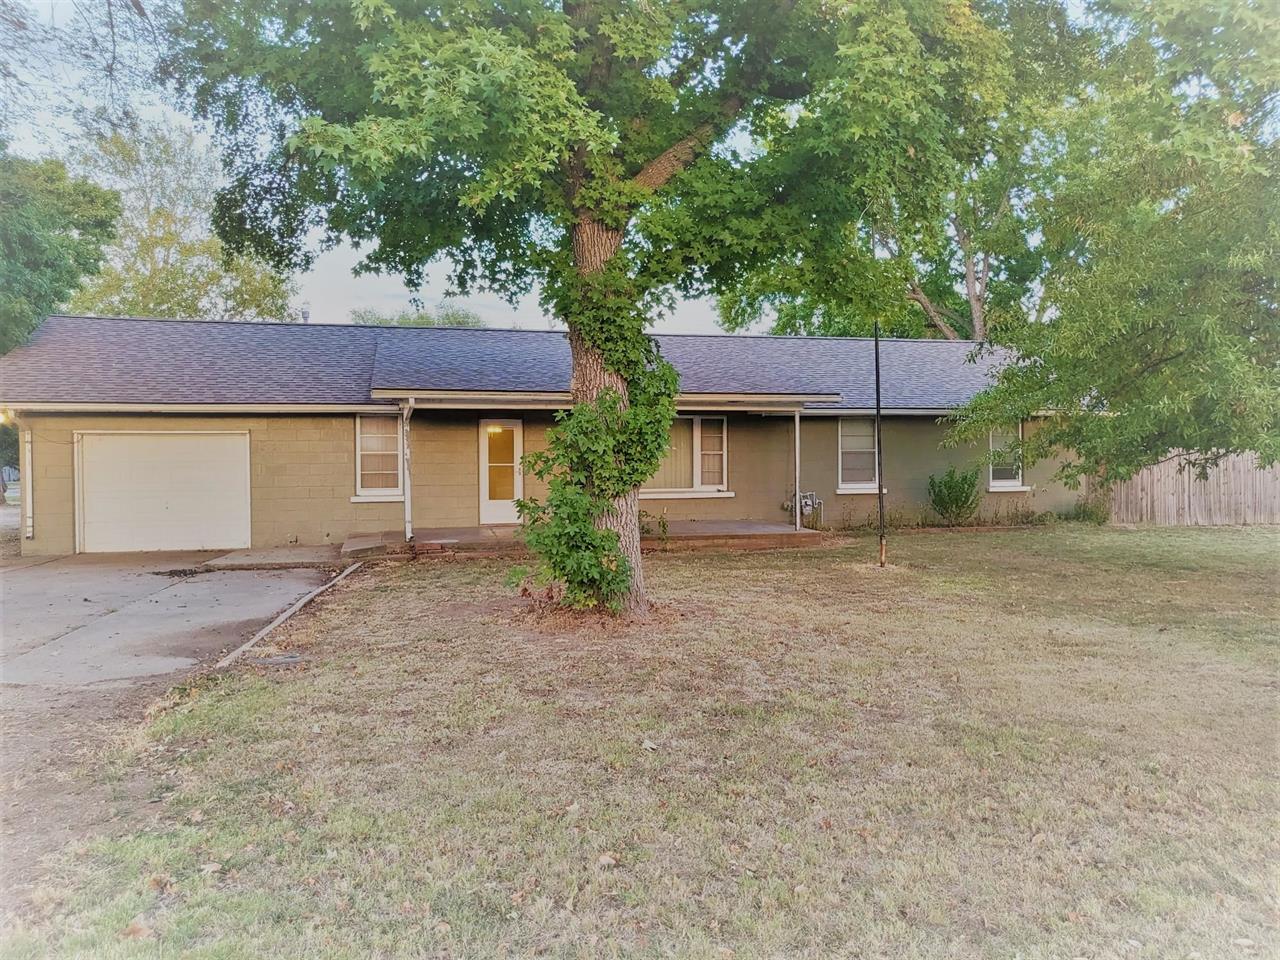 For Sale: 318 N Pacific St, Oxford KS